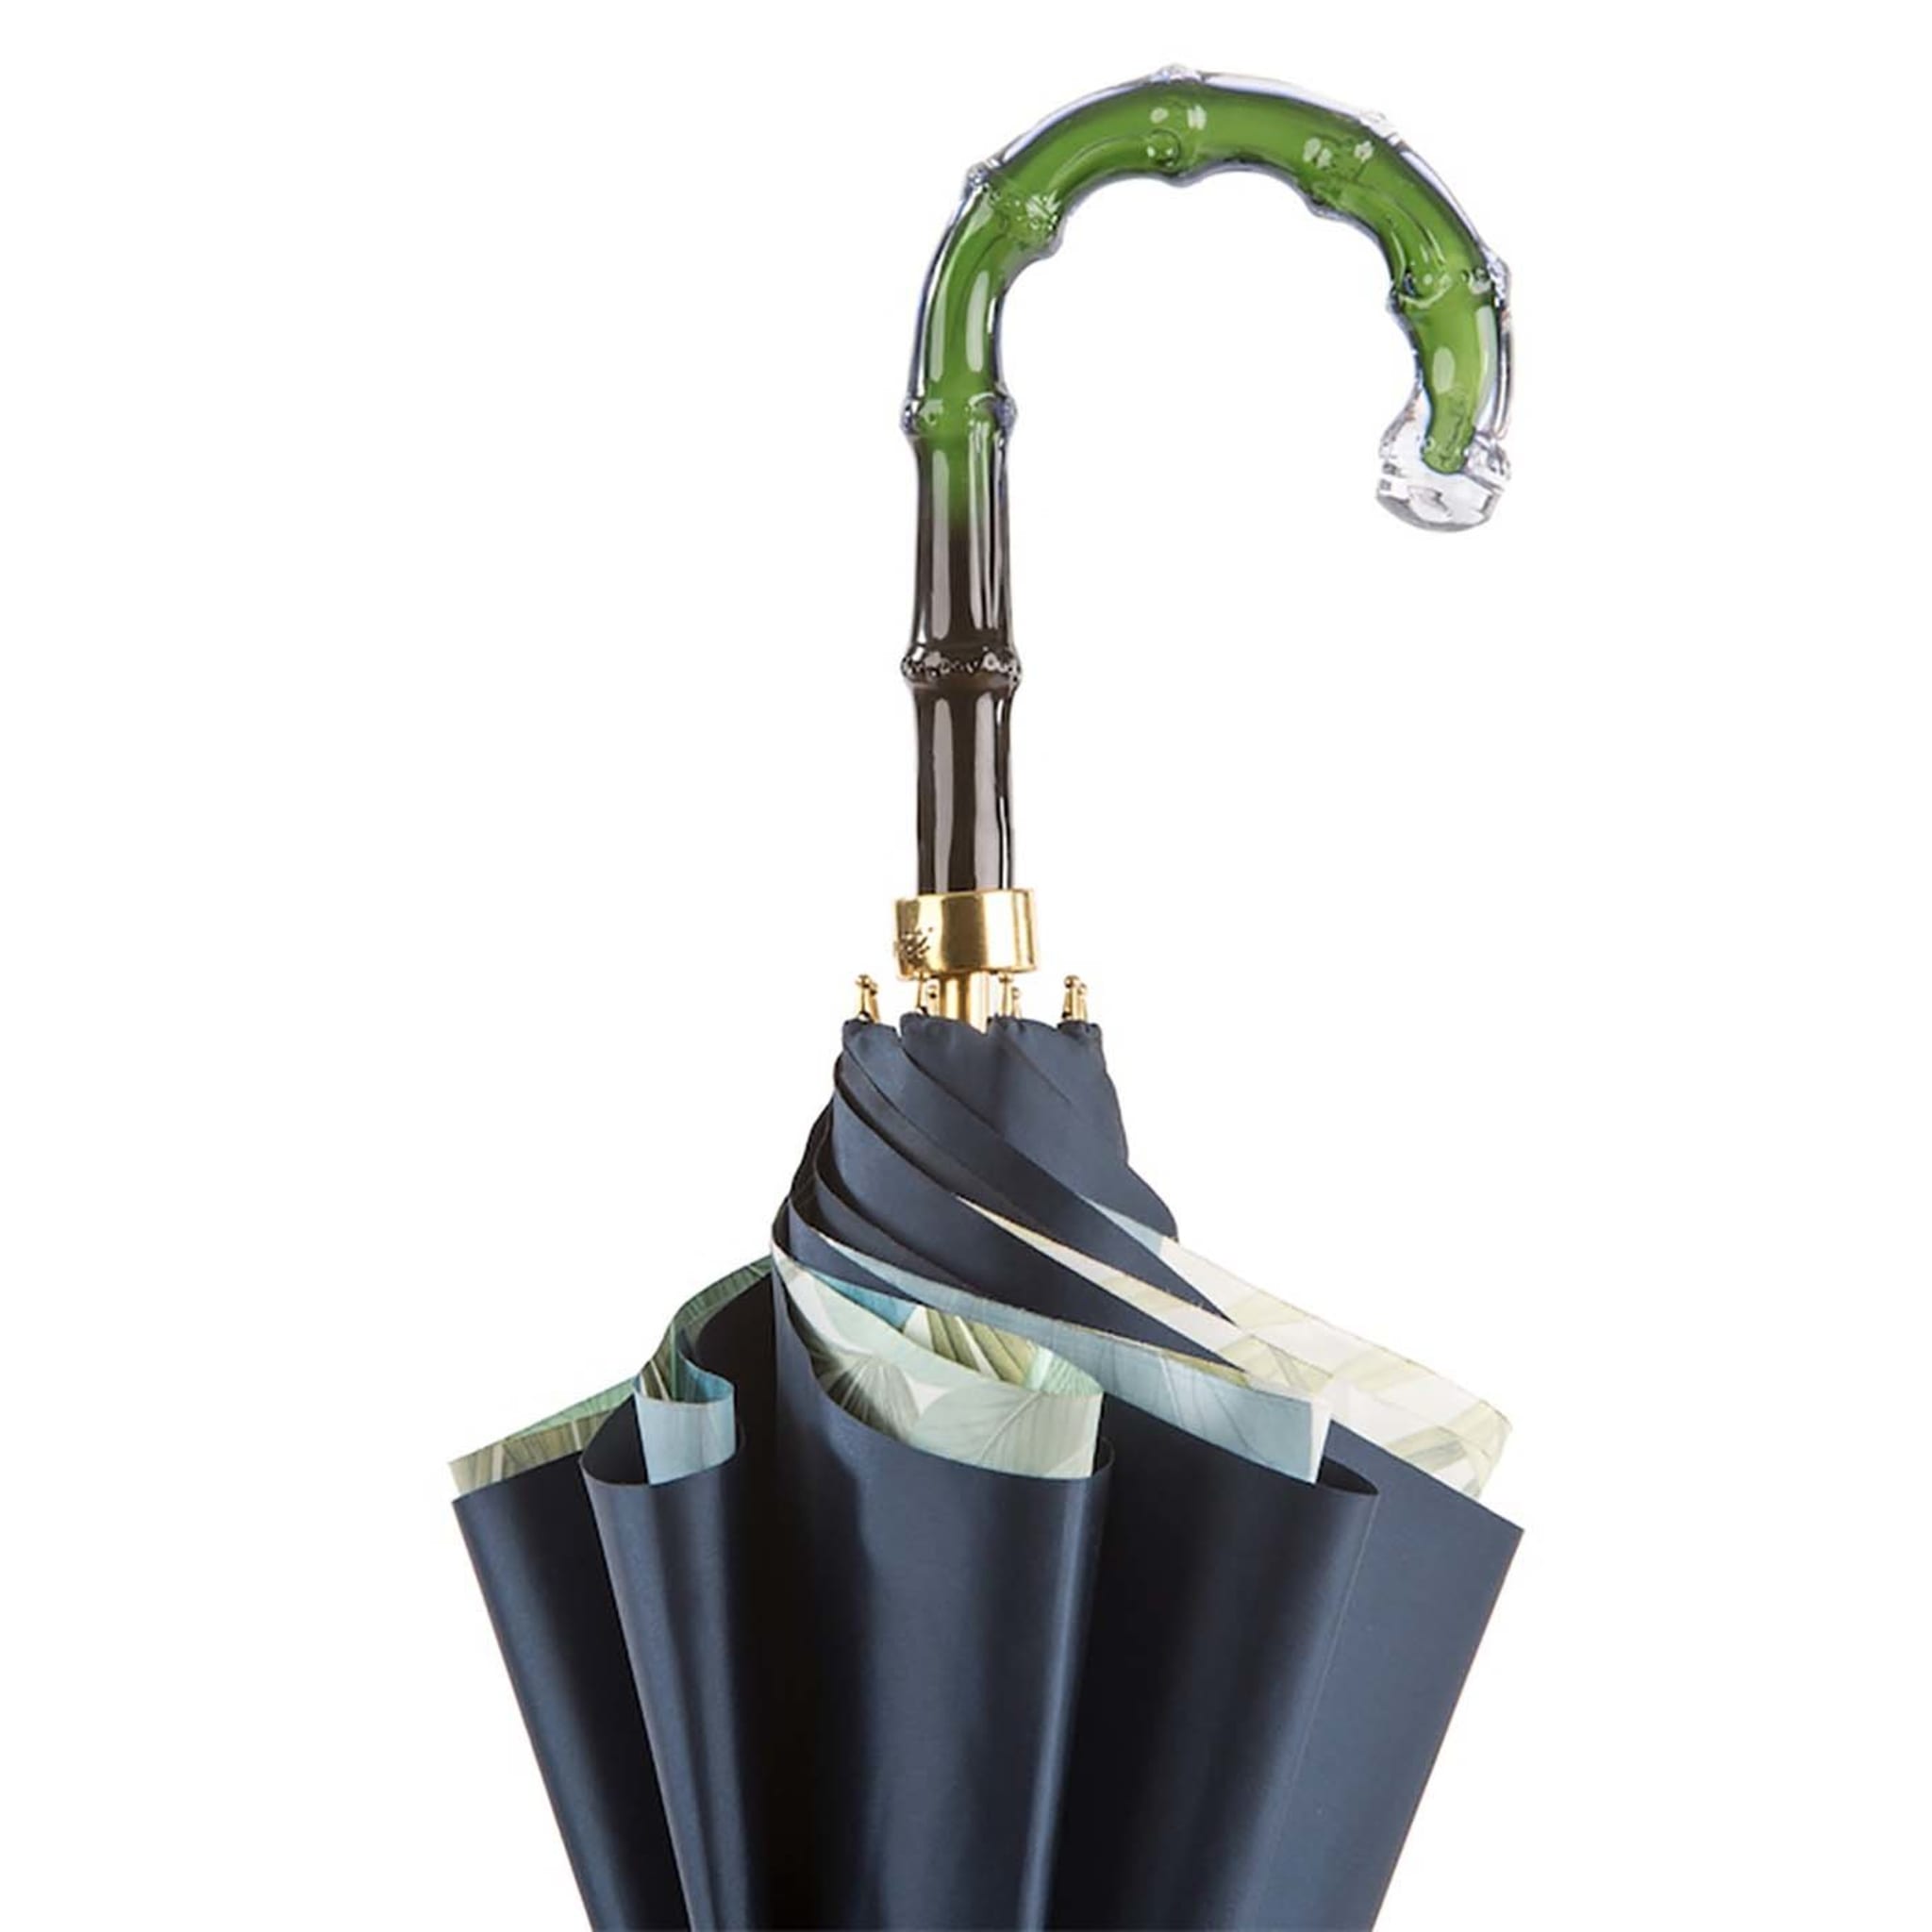 Tropical Umbrella with Green Acetate Handle - Alternative view 3